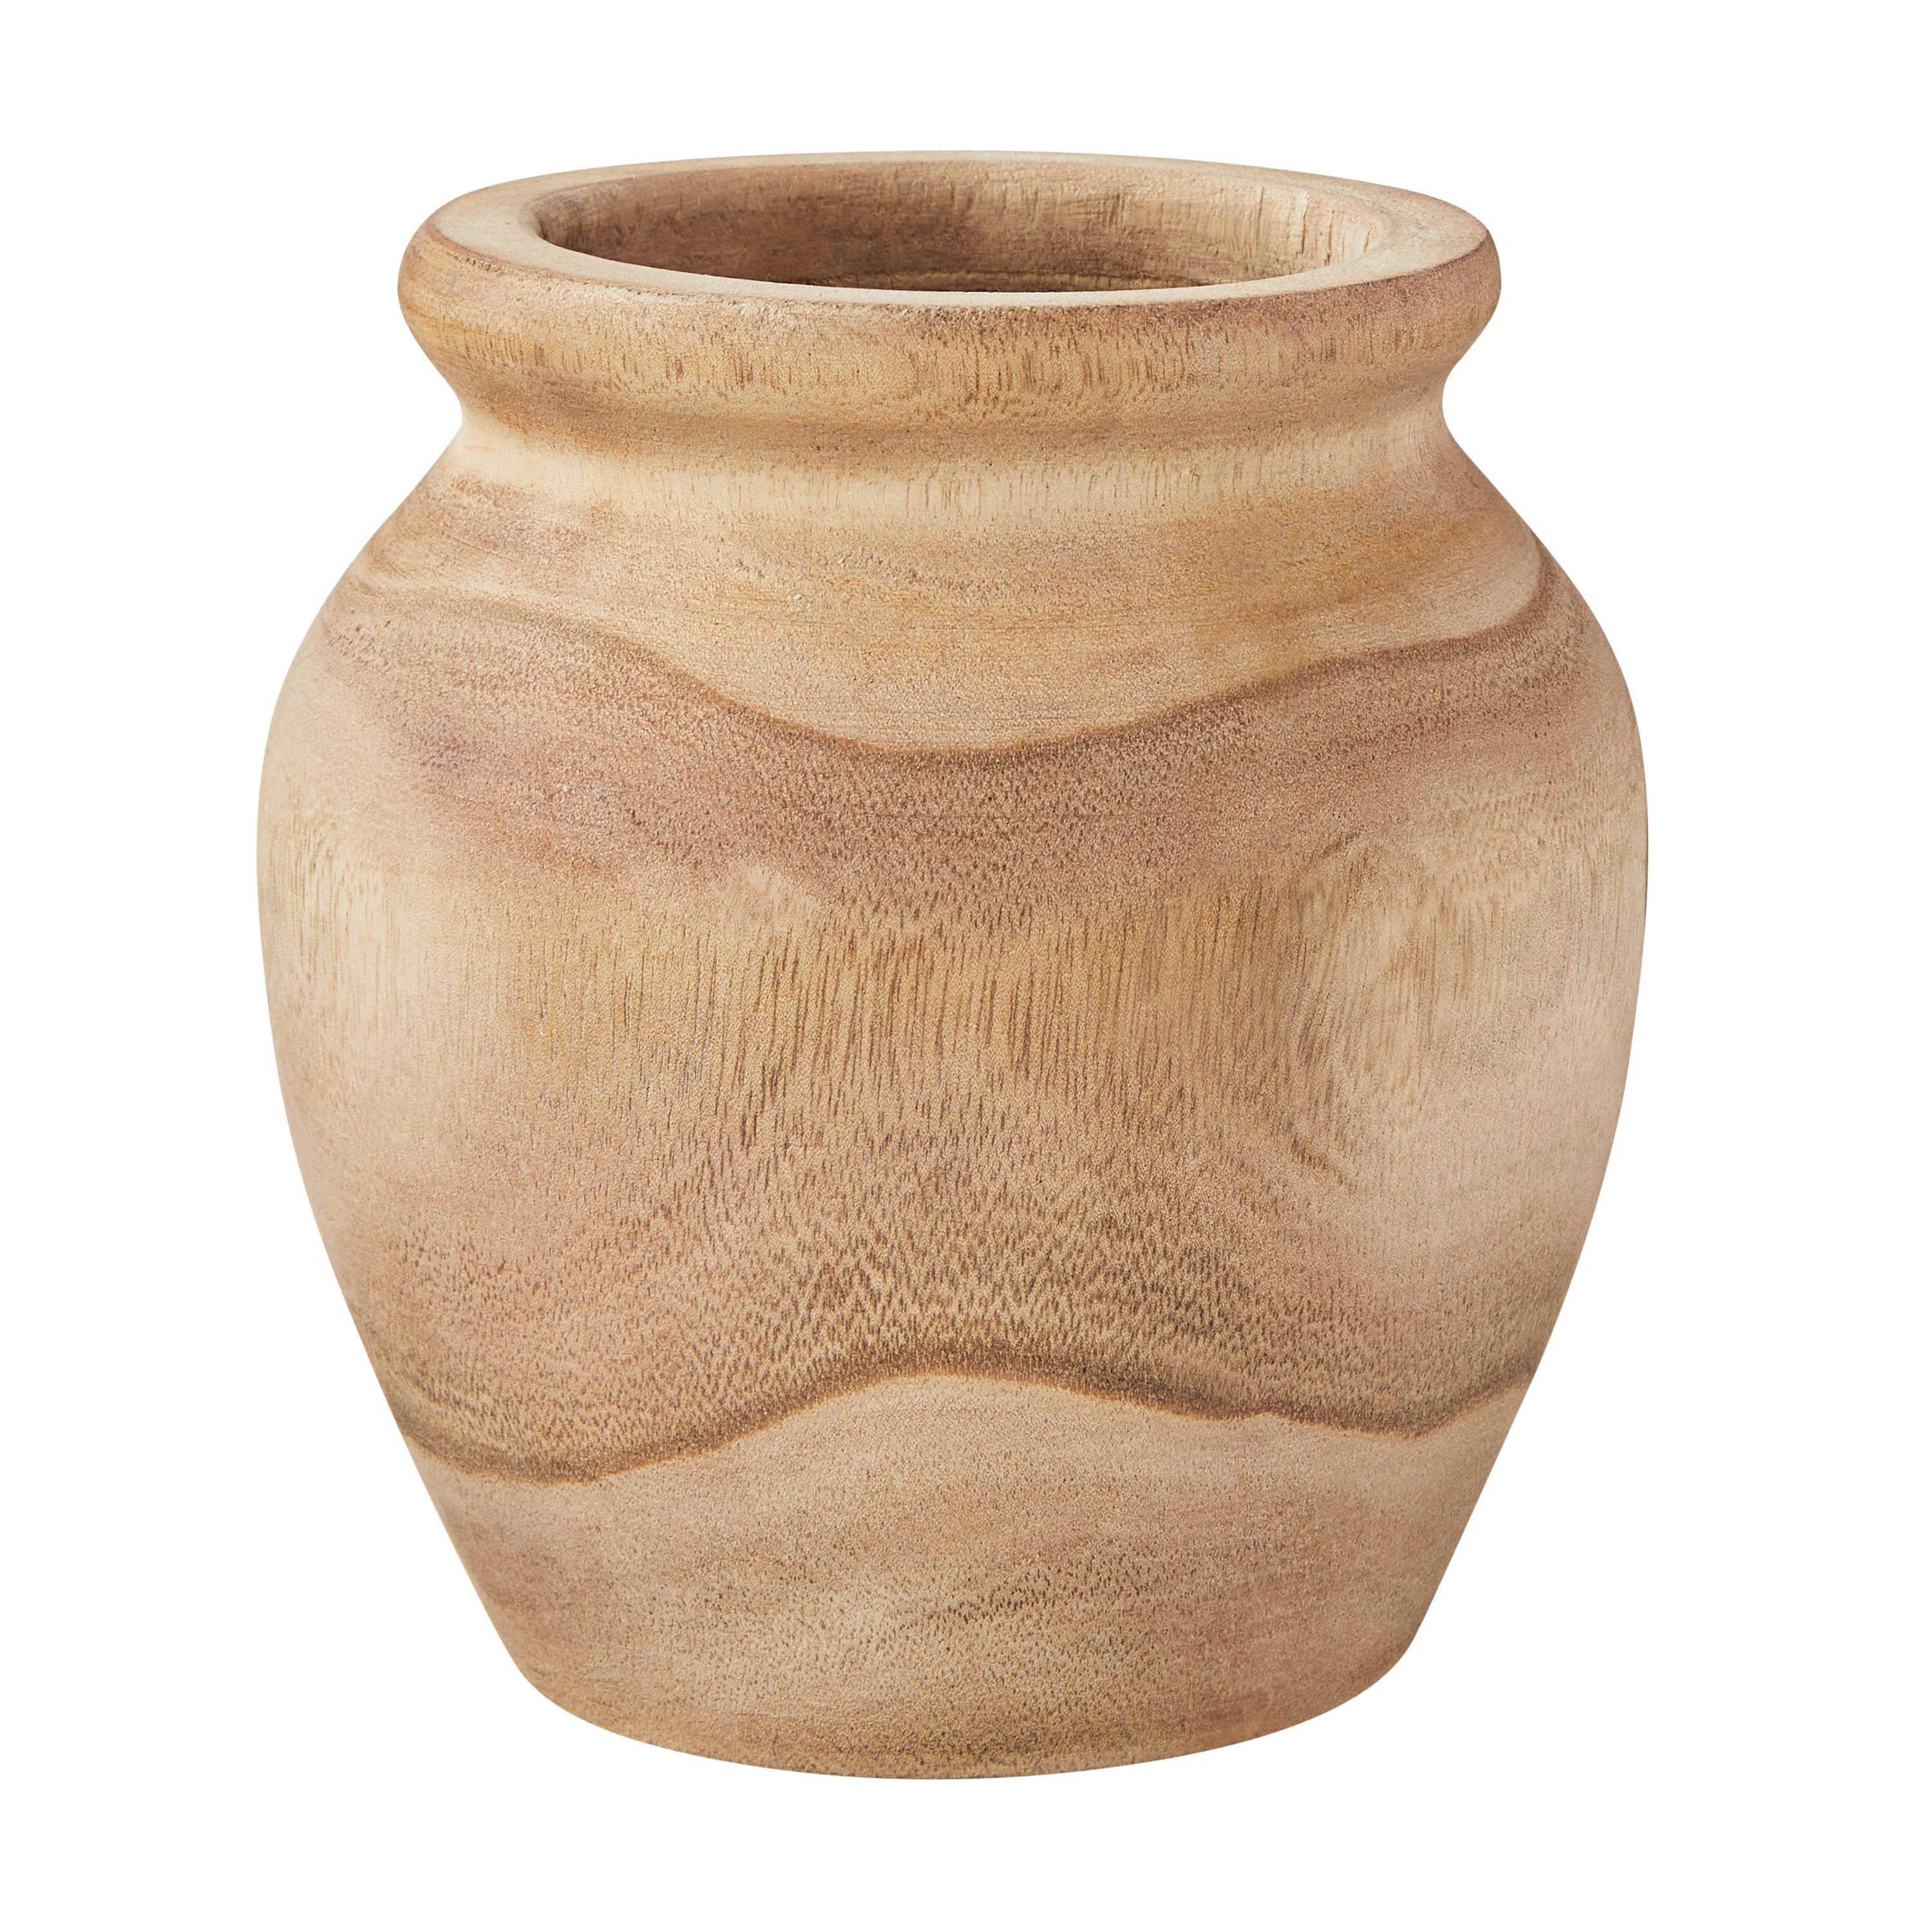 Better Homes & Gardens 7" Natural Wood Vase by Dave & Jenny Marrs - image 1 of 5